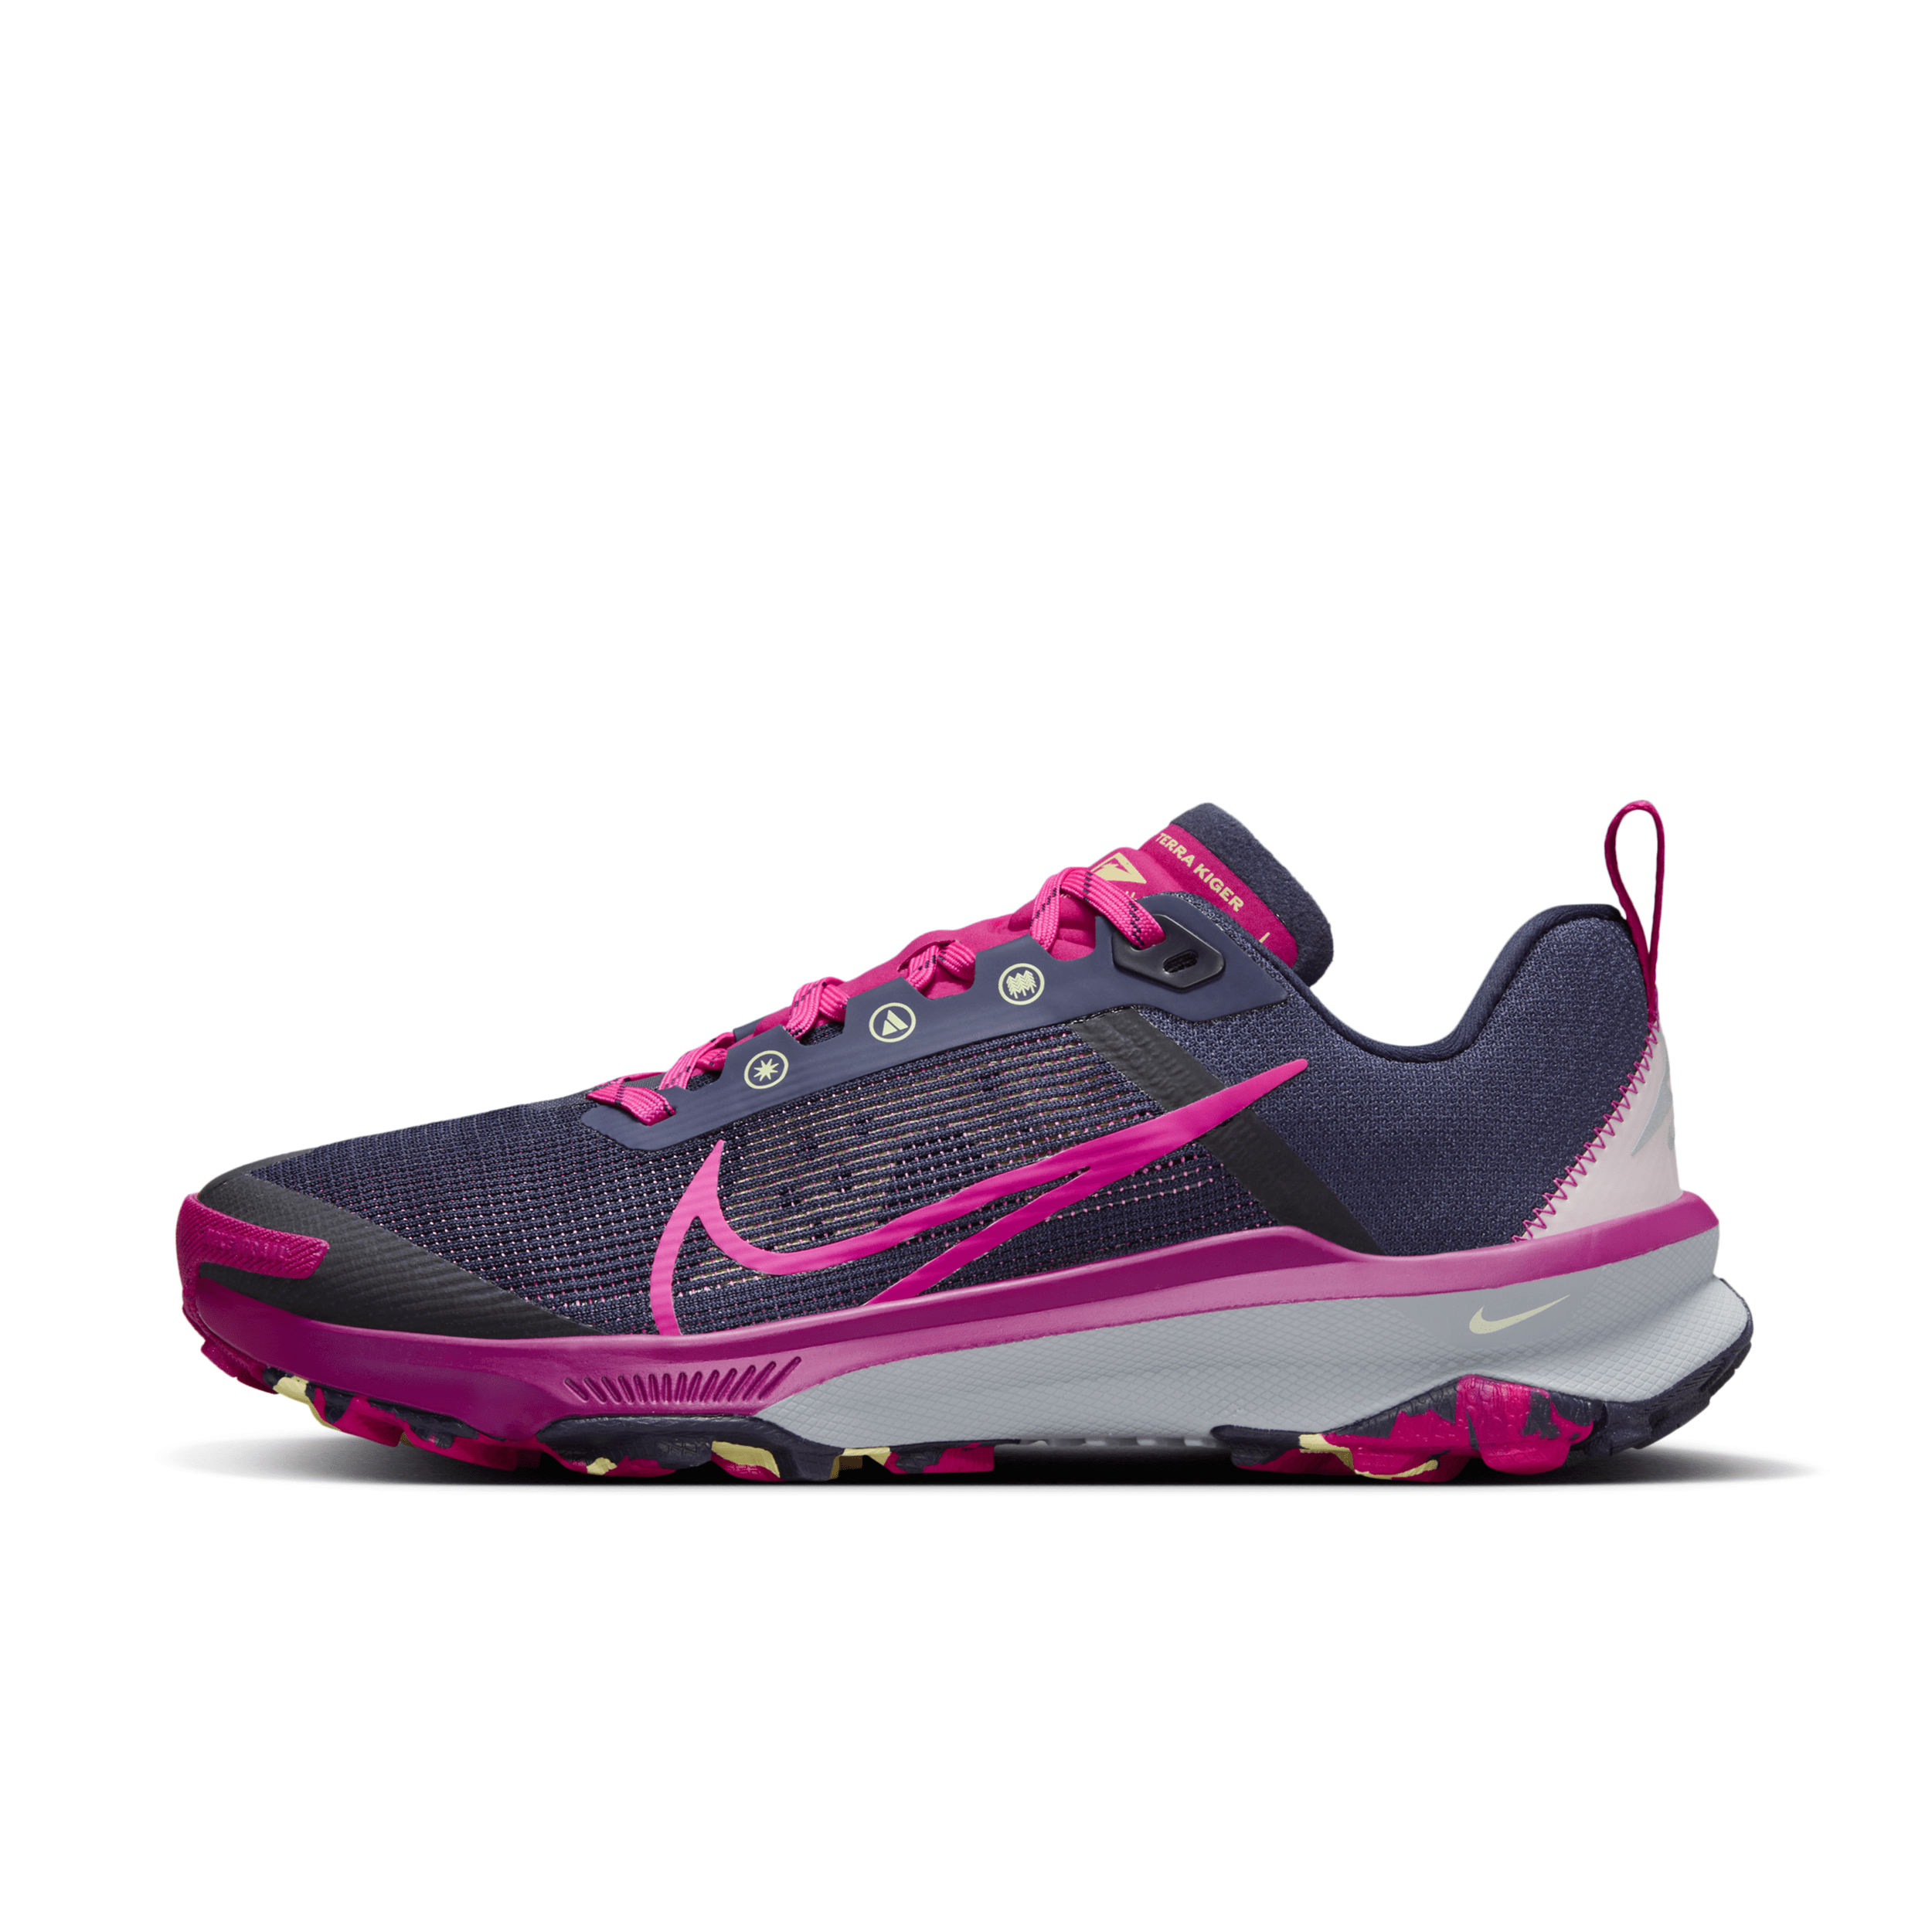 Nike Kiger 9 Women's Trail Running Shoes.